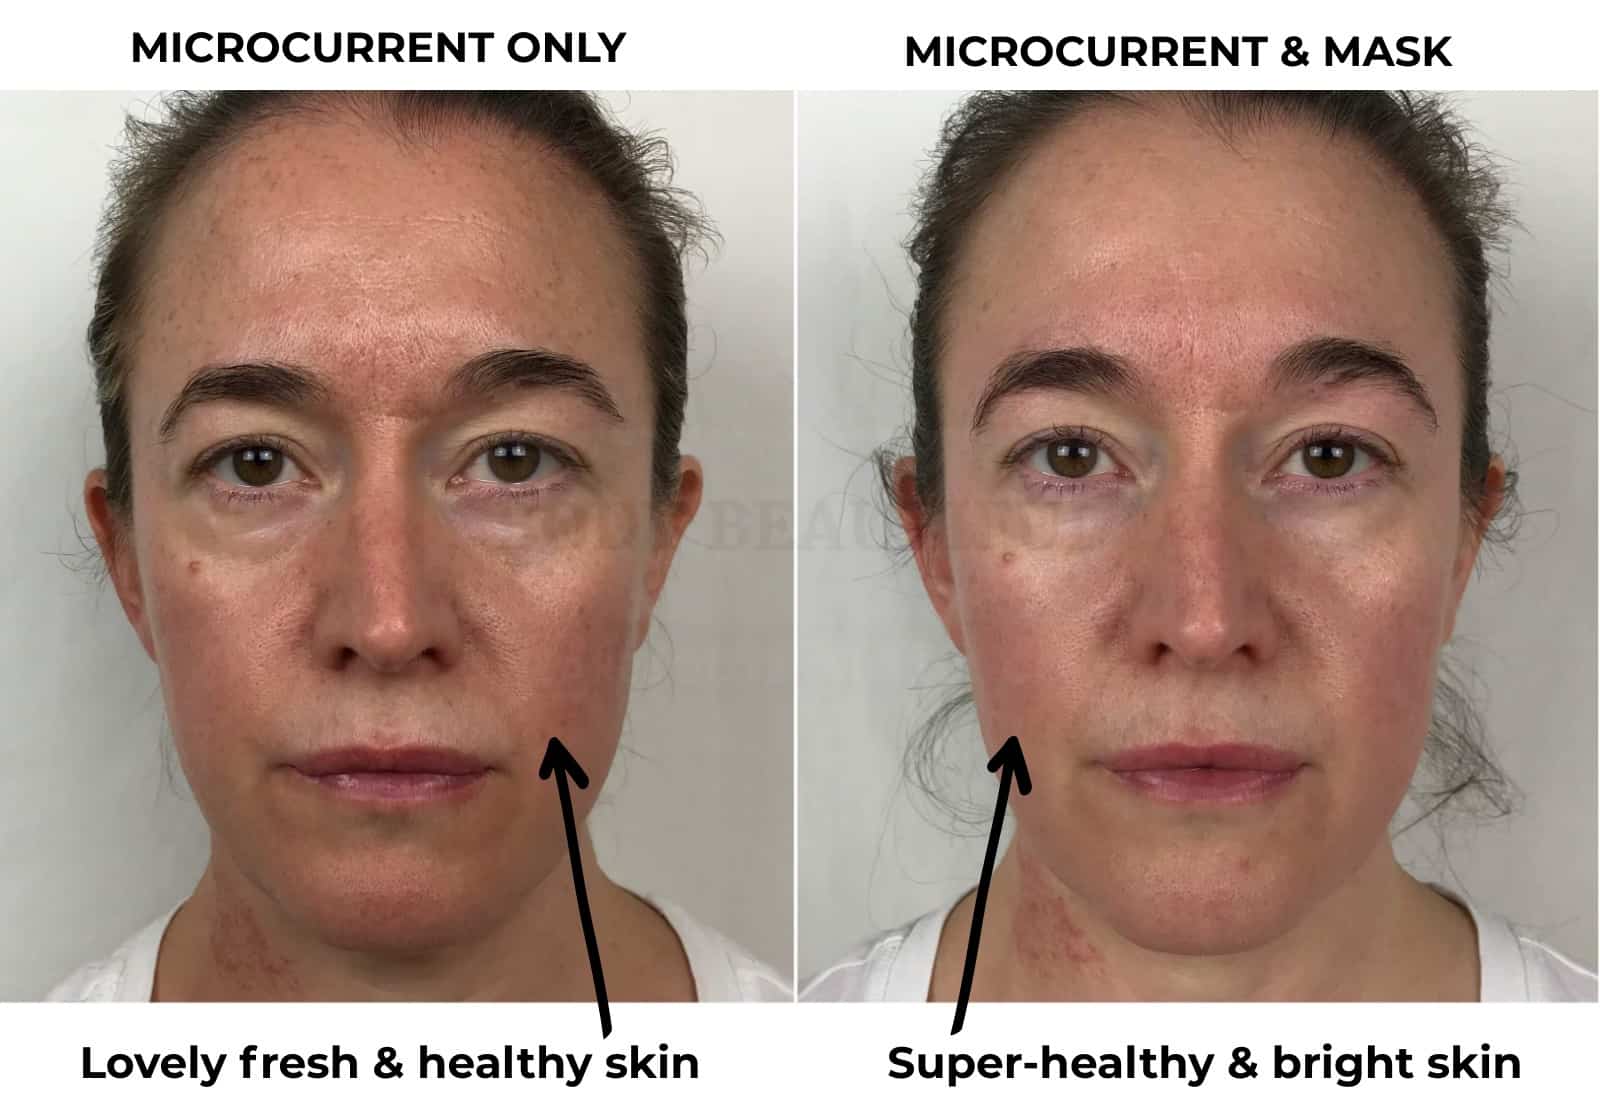 Even perkier and bright skin after 4 weeks of the CurrentBody Skin LED mask and Microcurrent combined